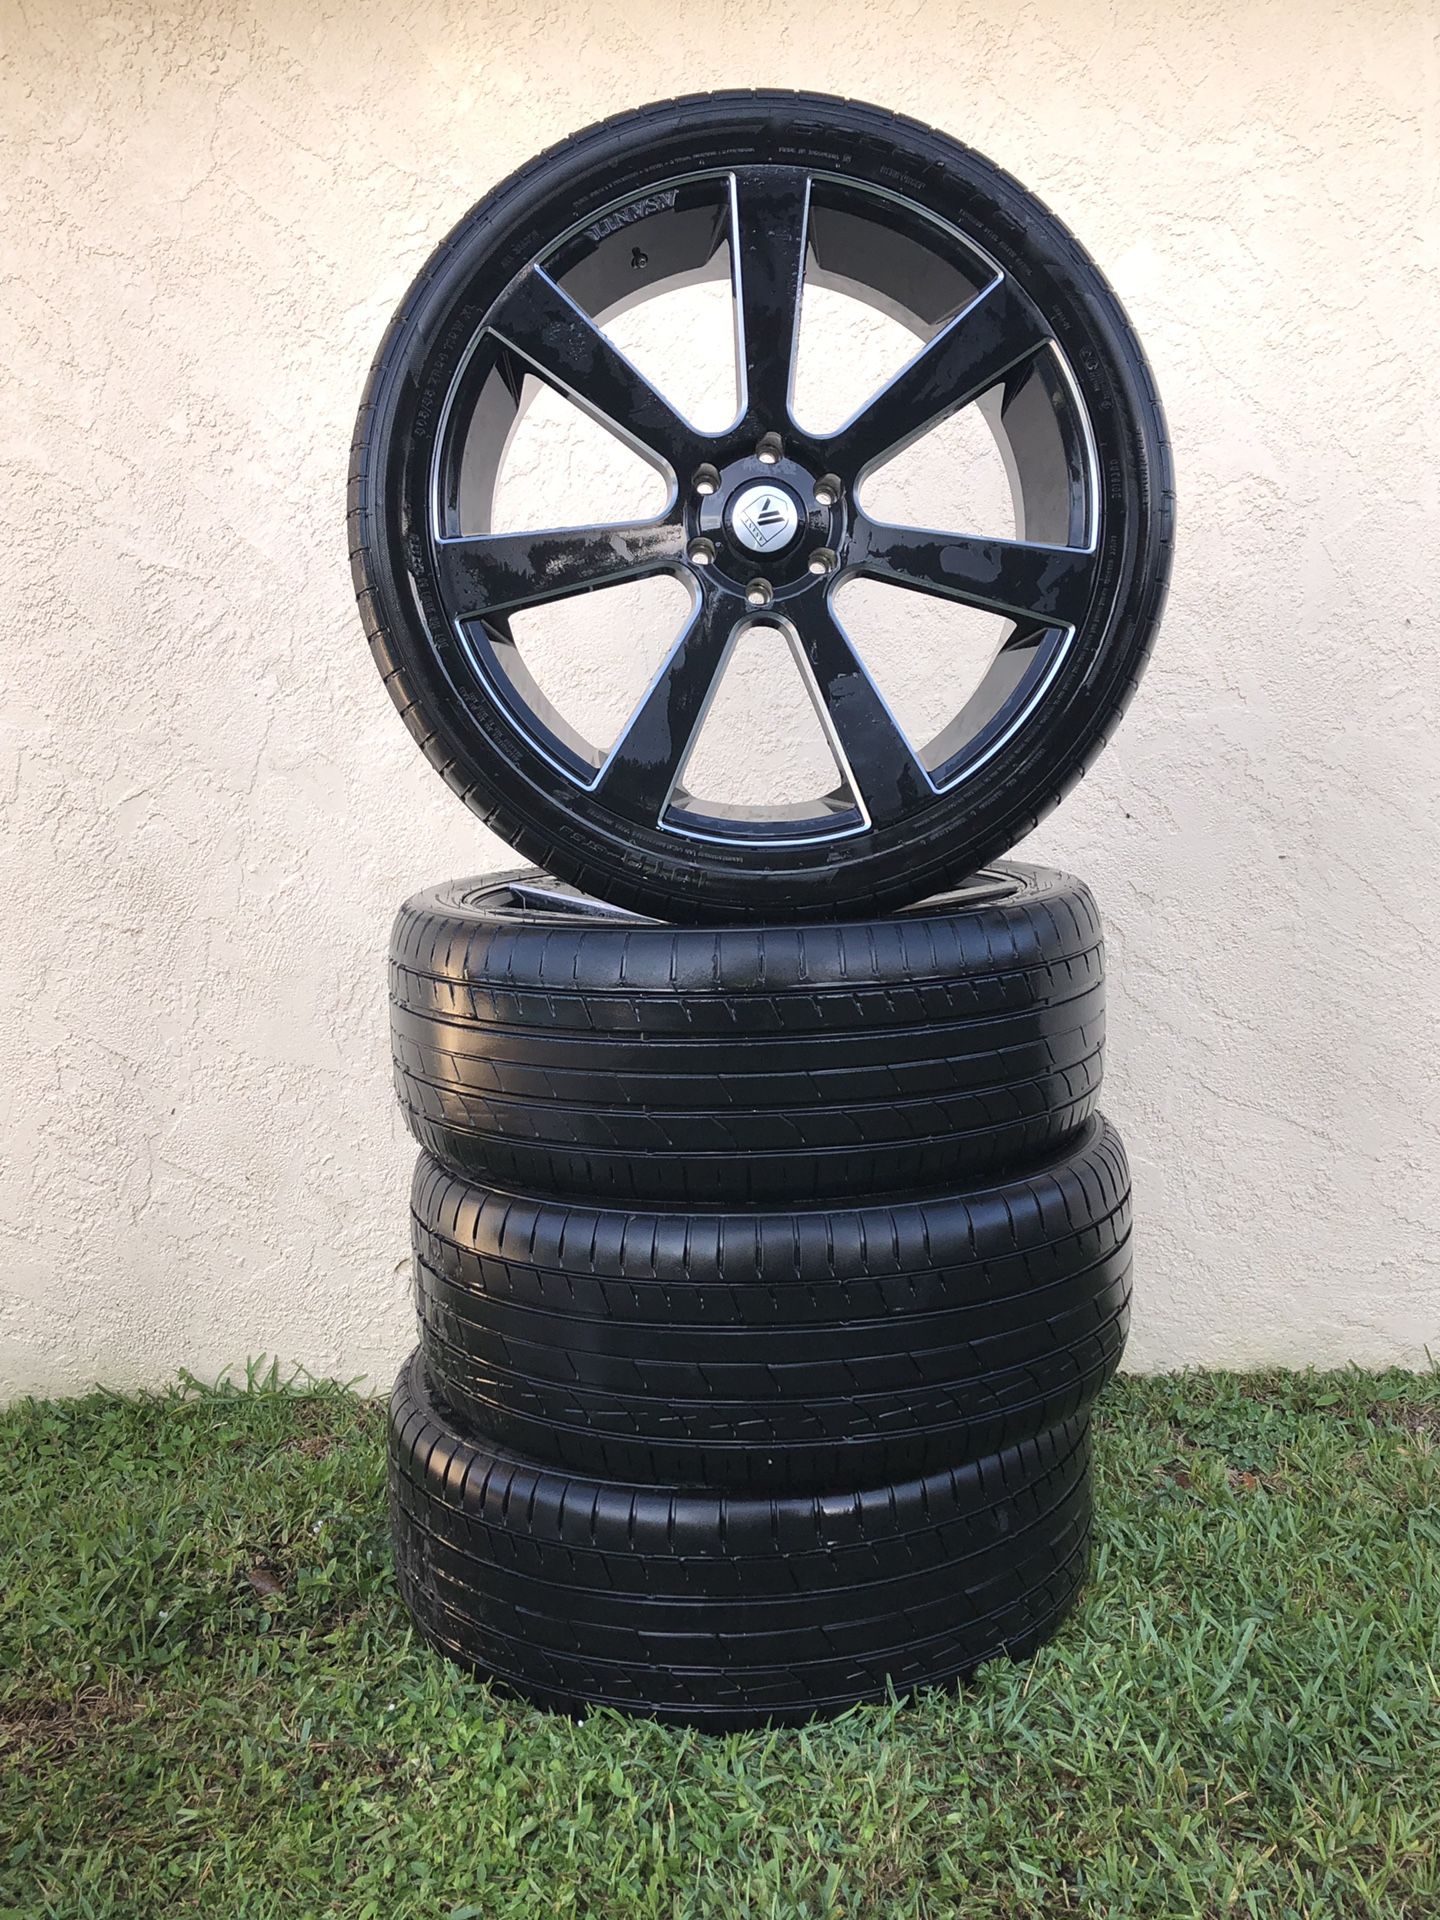 Silver and Black 24 inch Rims with Accelera All Season Tires